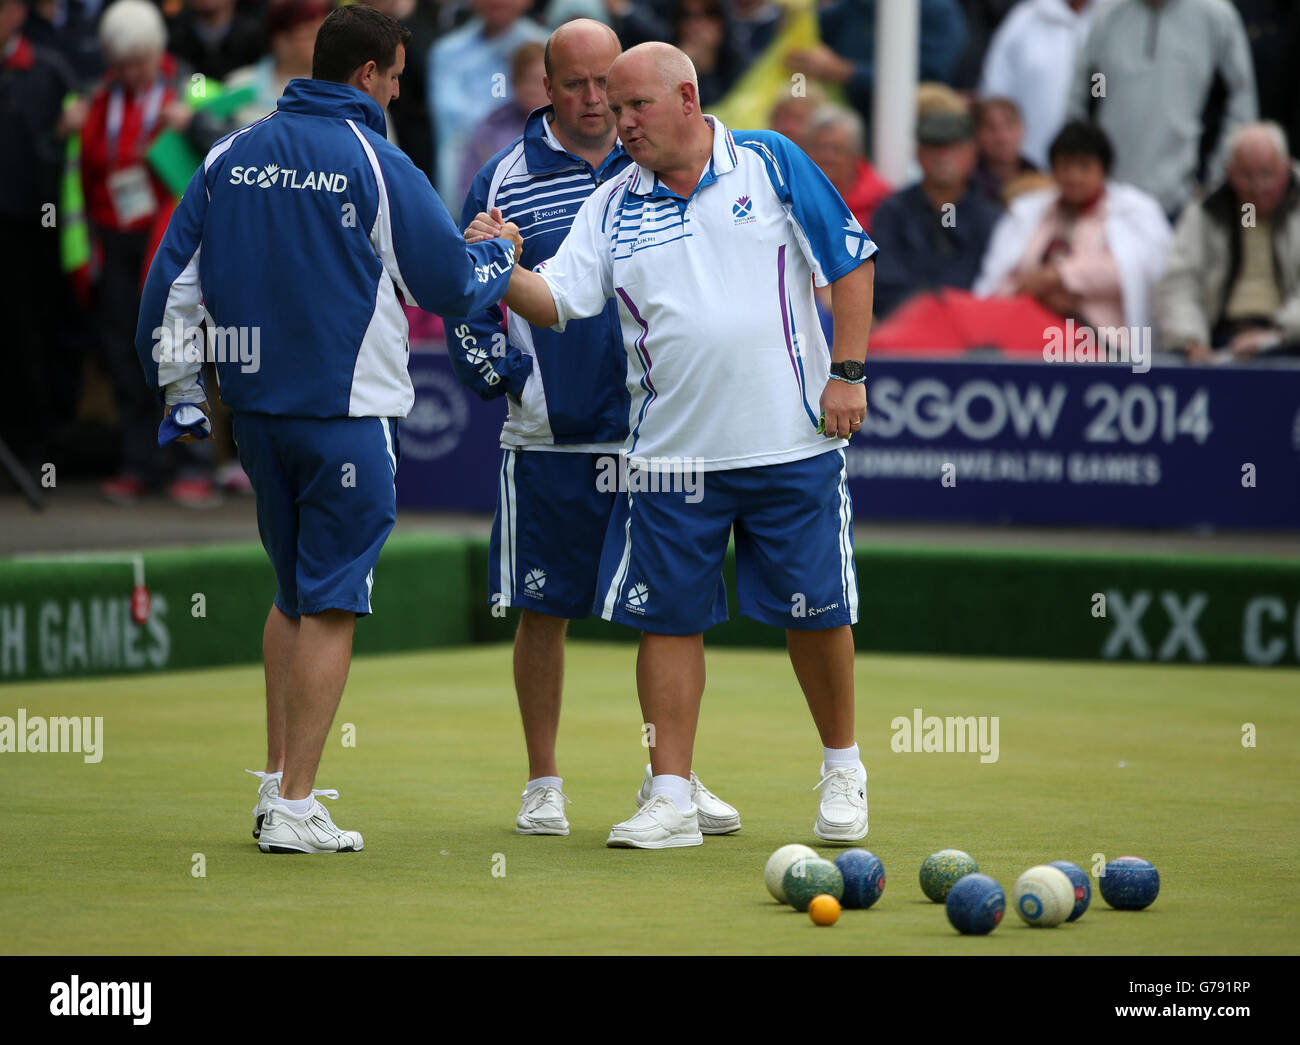 Scotland's (left-right) Neil Speirs shakes hands with Alex Marshall as they celebrate a shot in their Semi-final Men's Fours match against Australia at Kelvingrove Lawn Bowls Centre, during the 2014 Commonwealth Games in Glasgow. Stock Photo